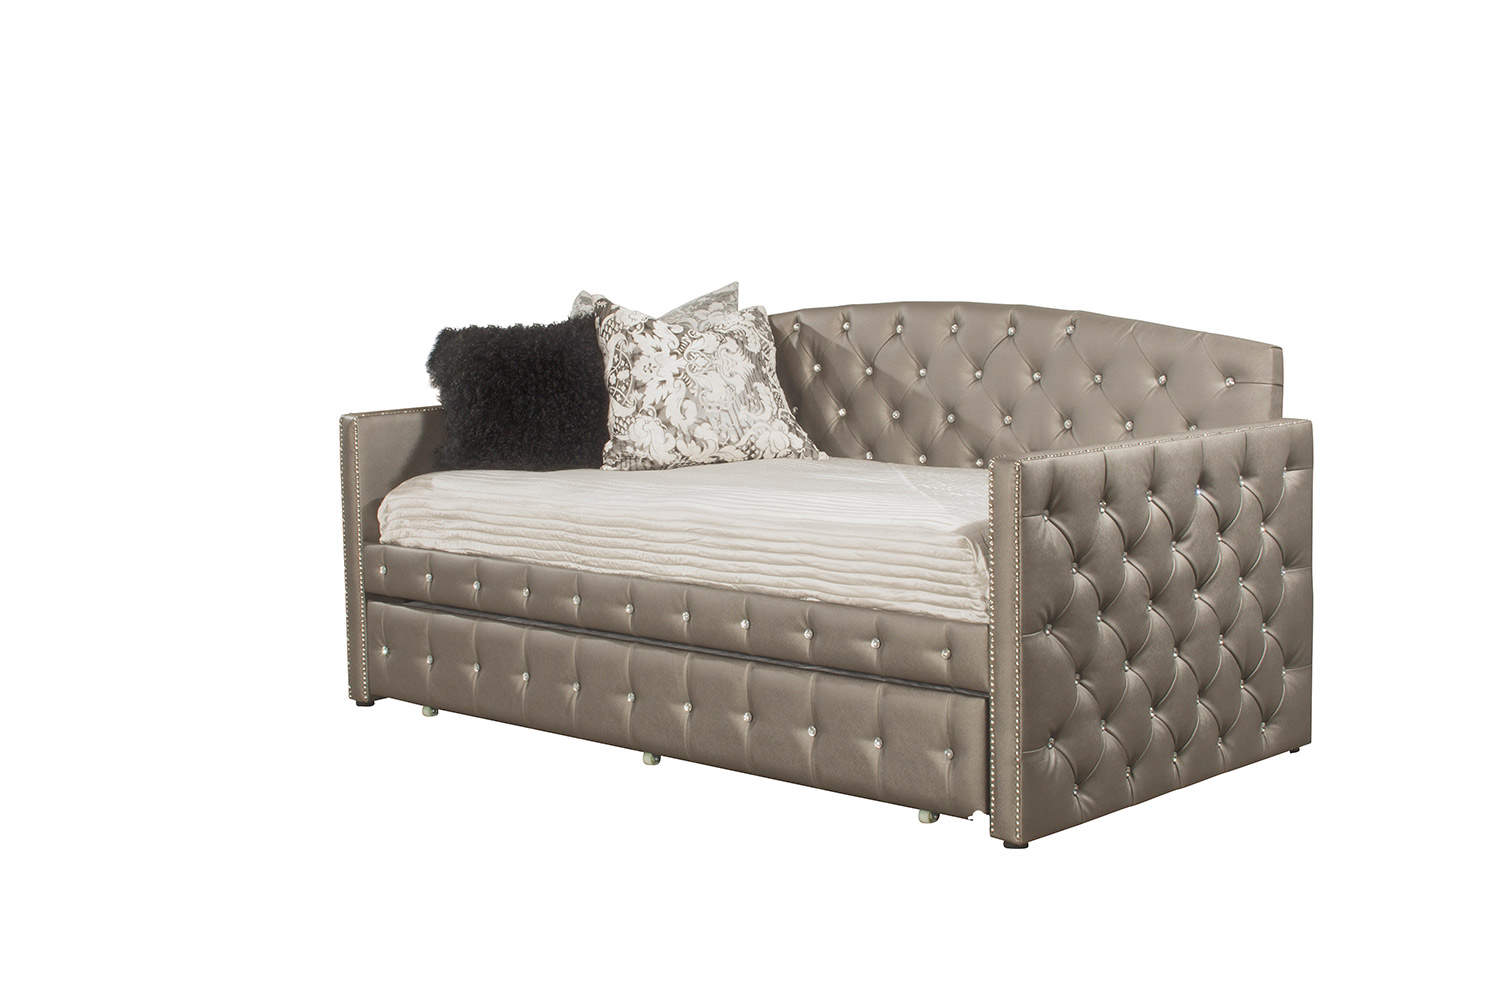 Hillsdale Memphis Daybed with Trundle - Diva Pewter Faux Leather